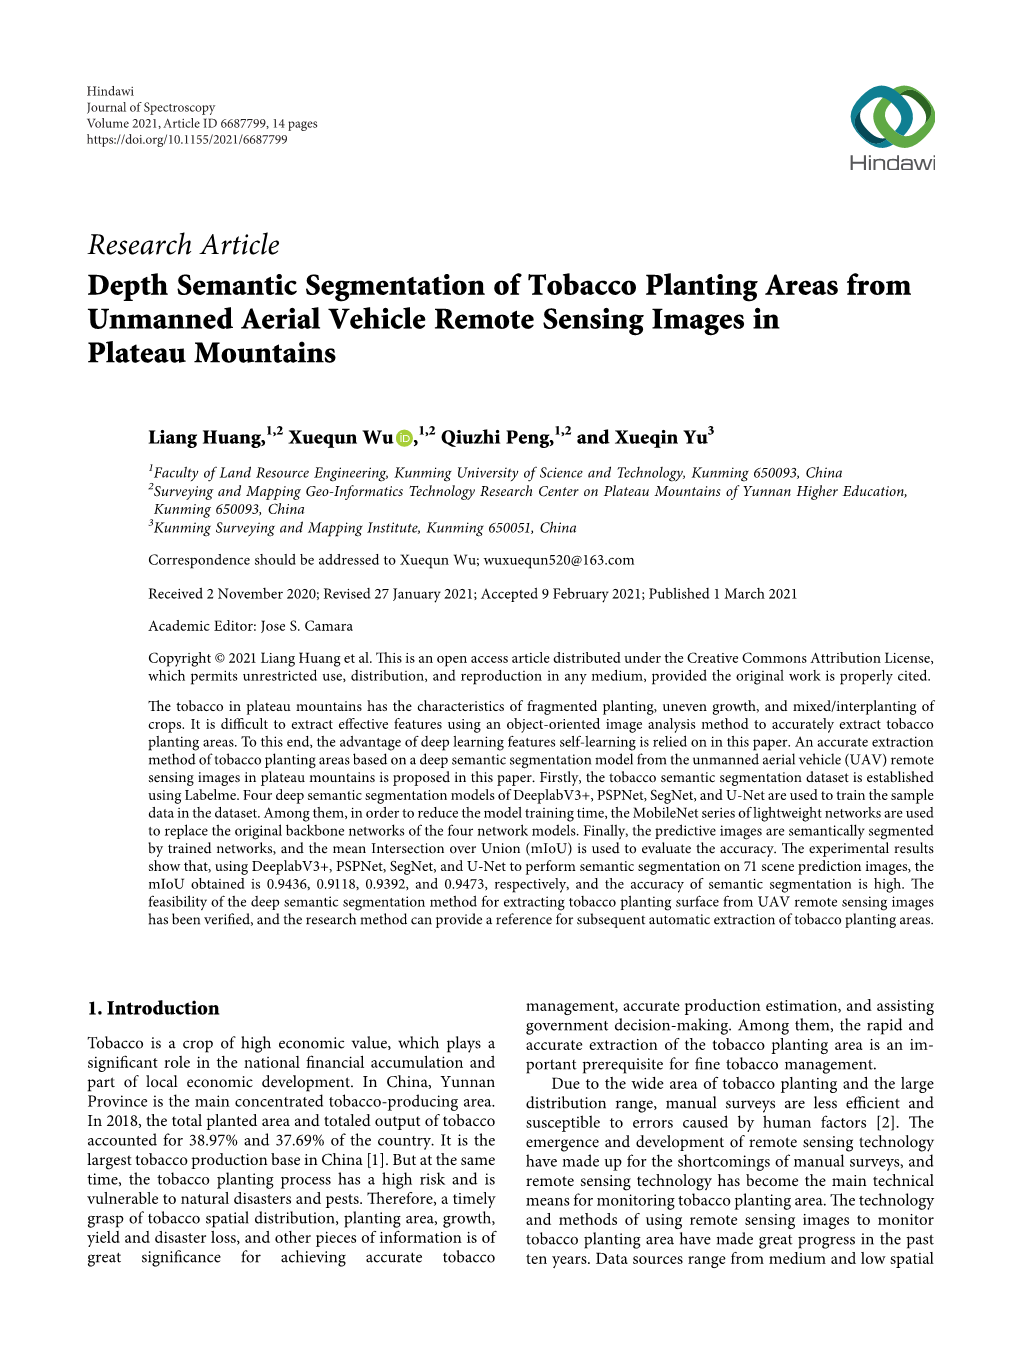 Depth Semantic Segmentation of Tobacco Planting Areas from Unmanned Aerial Vehicle Remote Sensing Images in Plateau Mountains